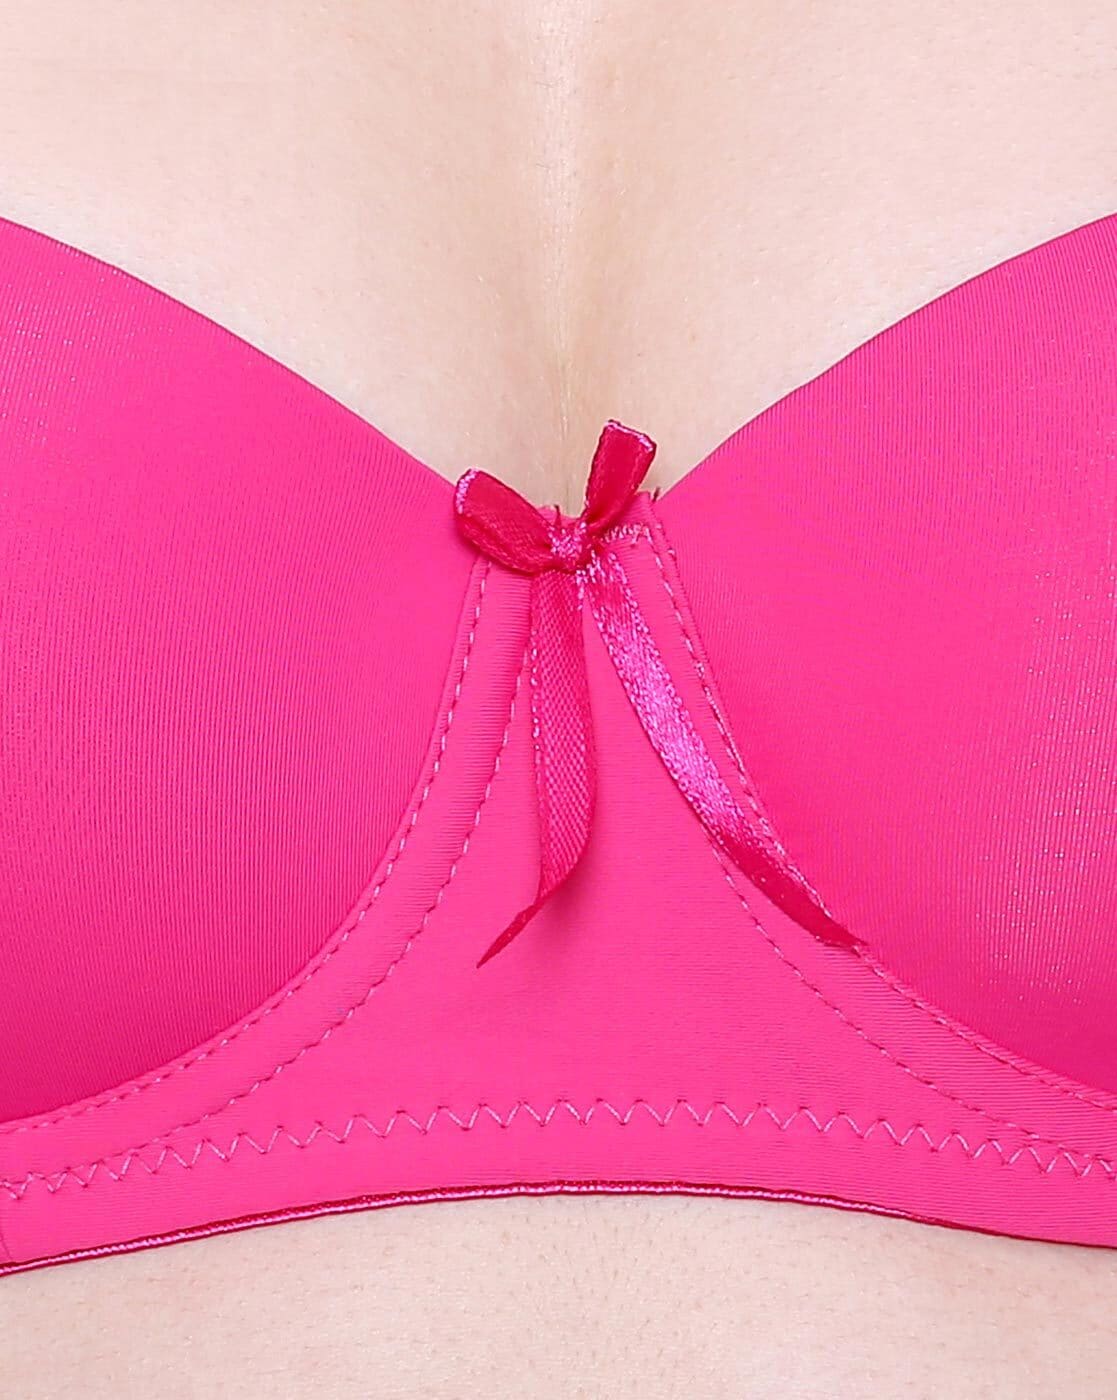 Buy Cotton Bra with Transparent Straps & Back - Pink Online India